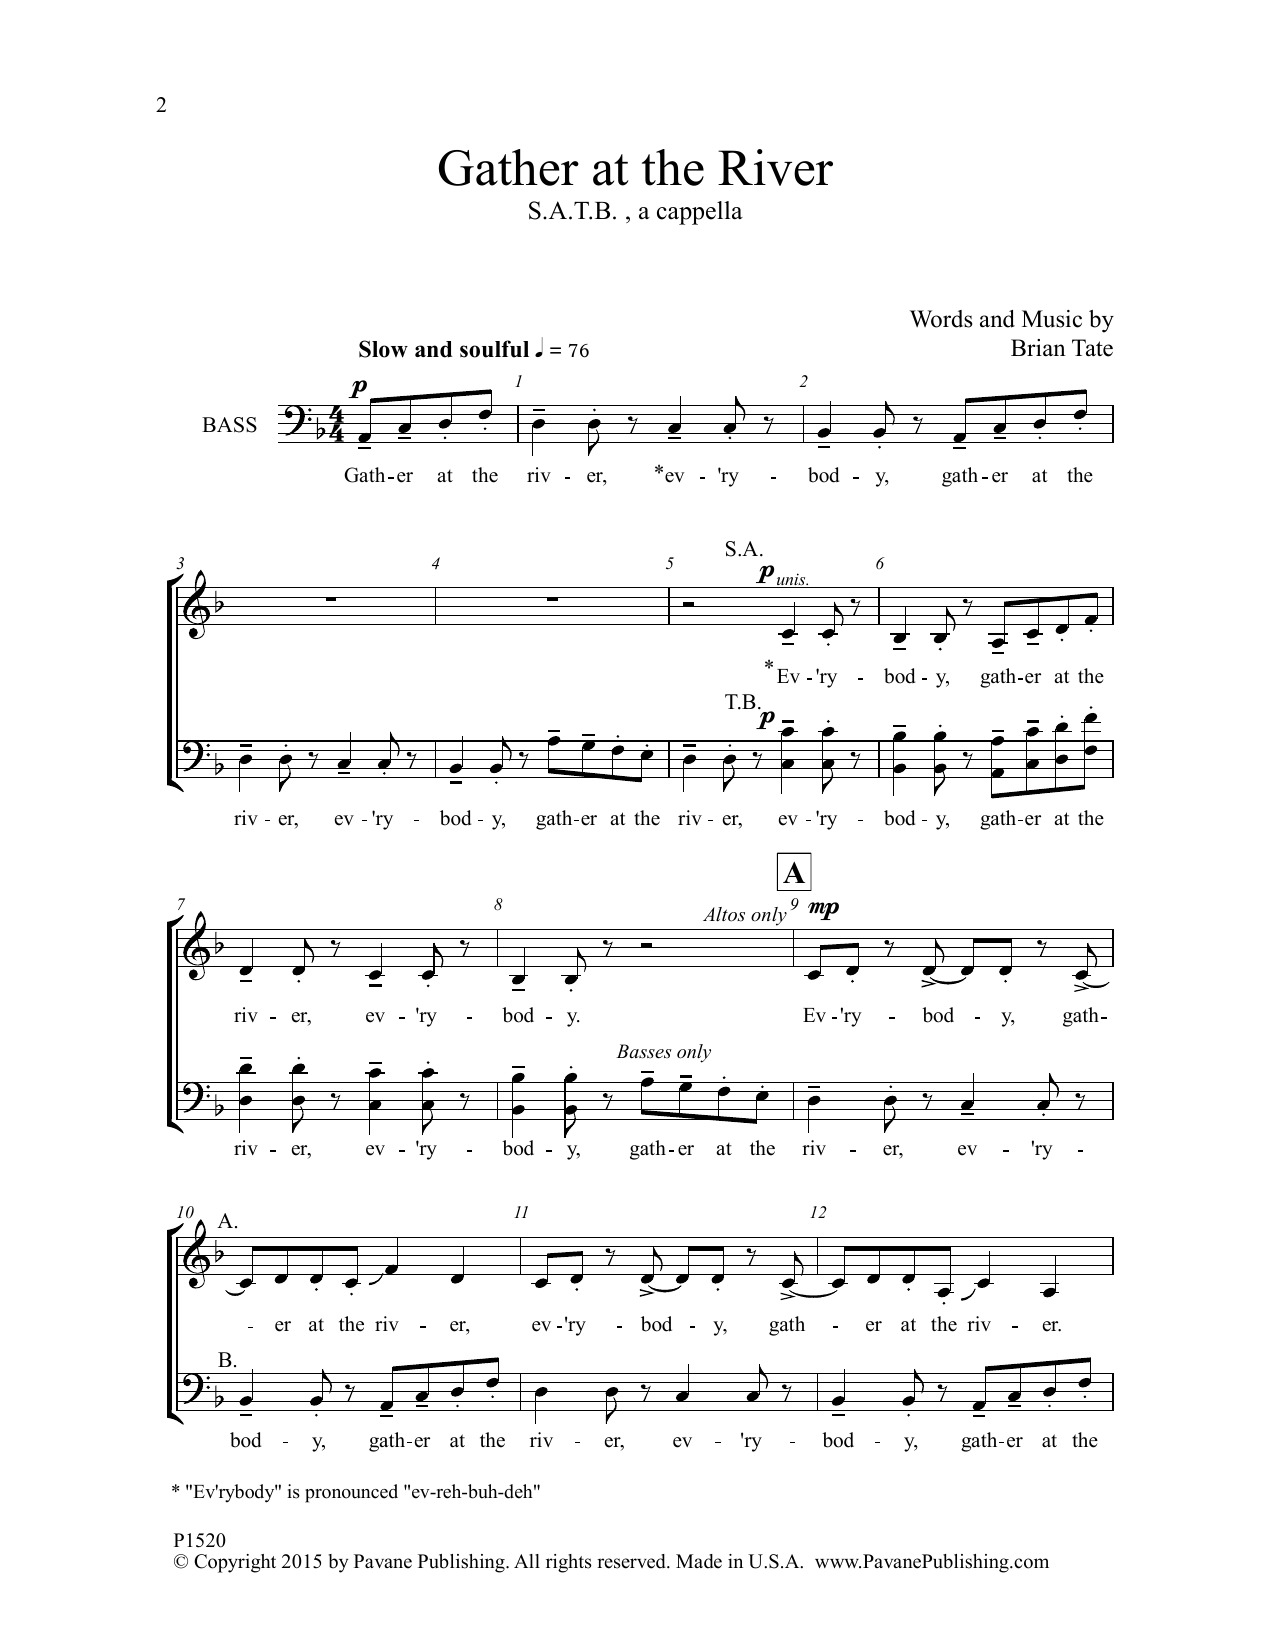 Brian Tate Gather at the River sheet music notes and chords. Download Printable PDF.